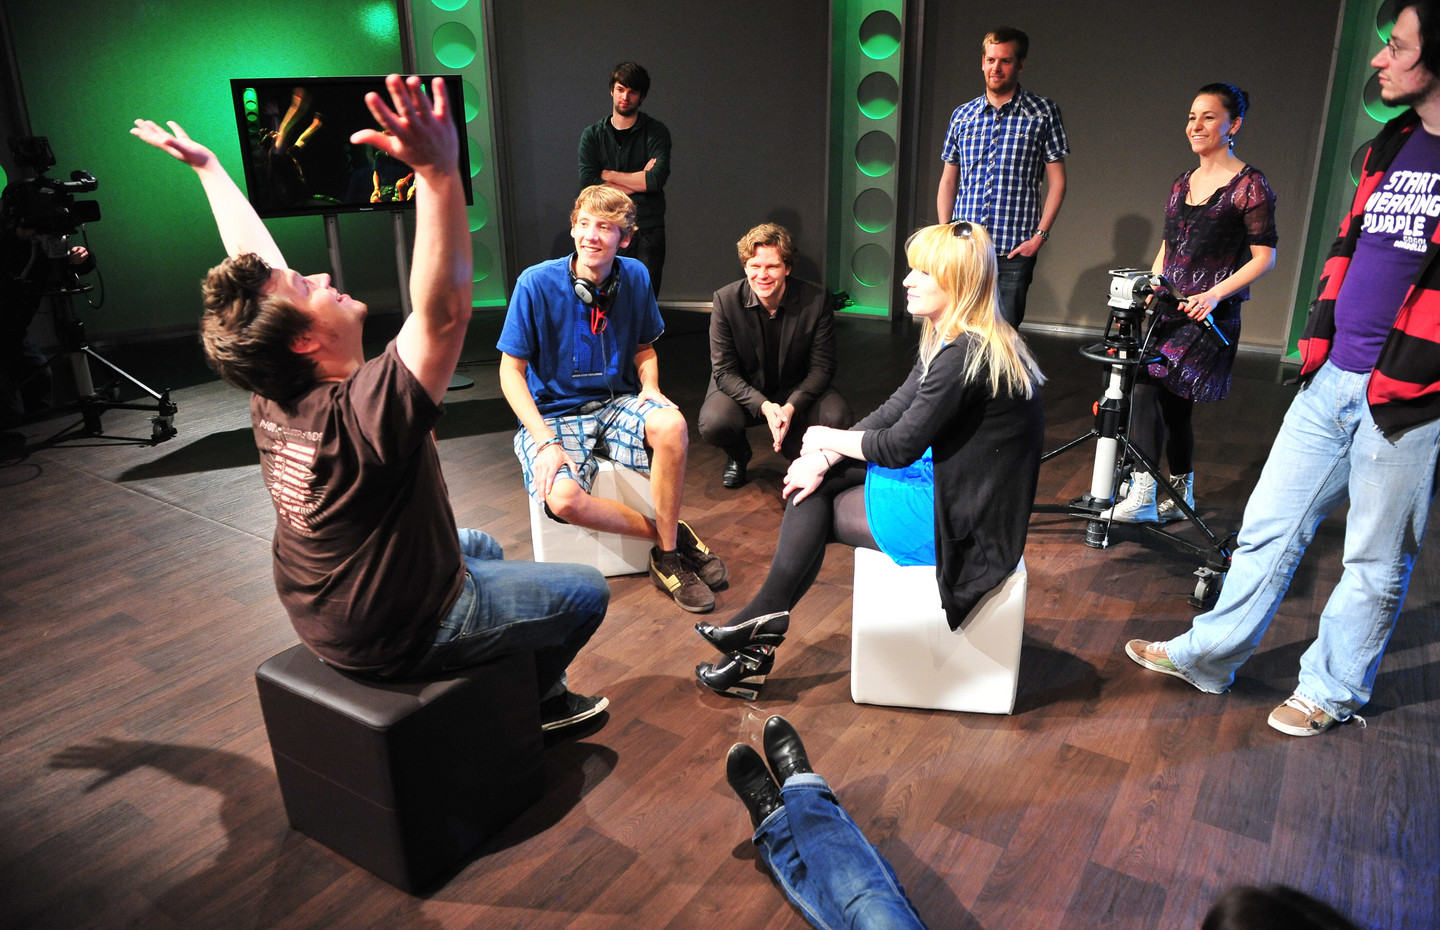 A group of journalism students having a discussion in a TV studio